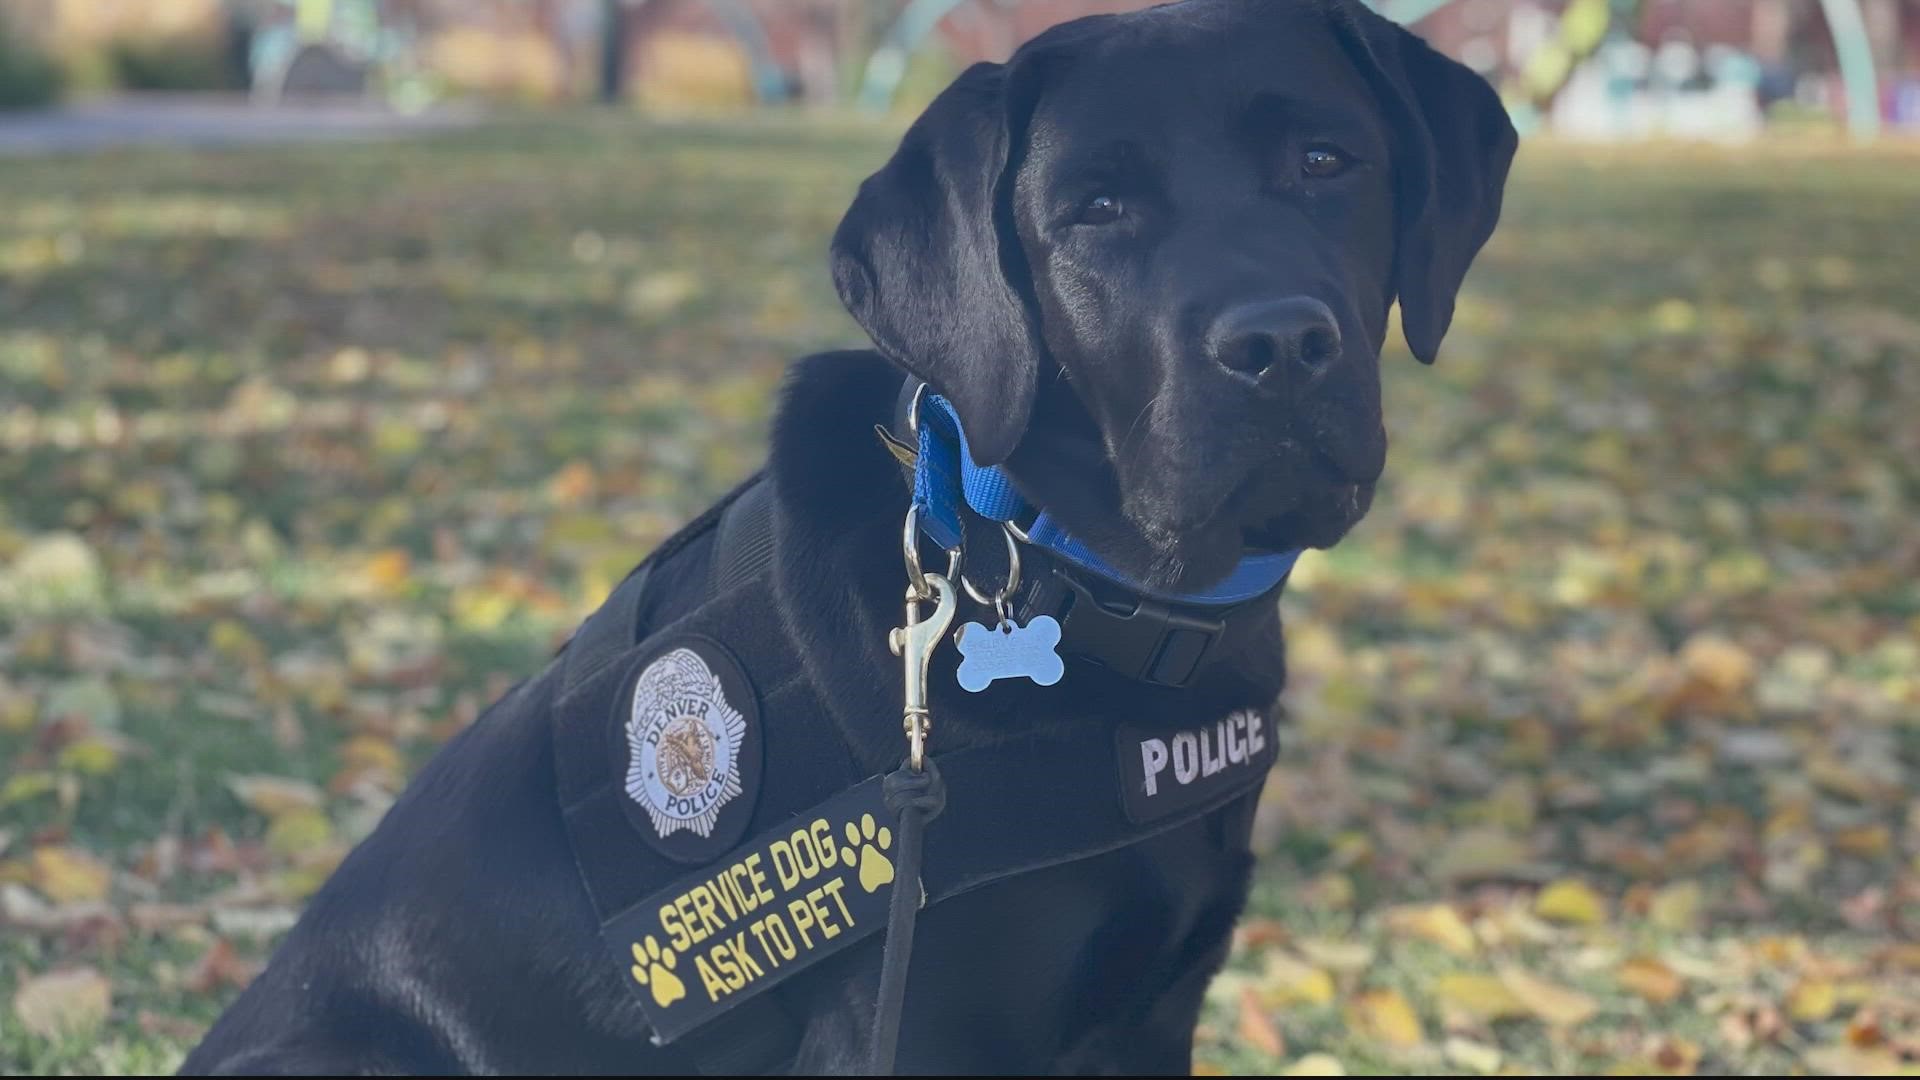 Meet Lila, an official member of the Capitol Police Force.